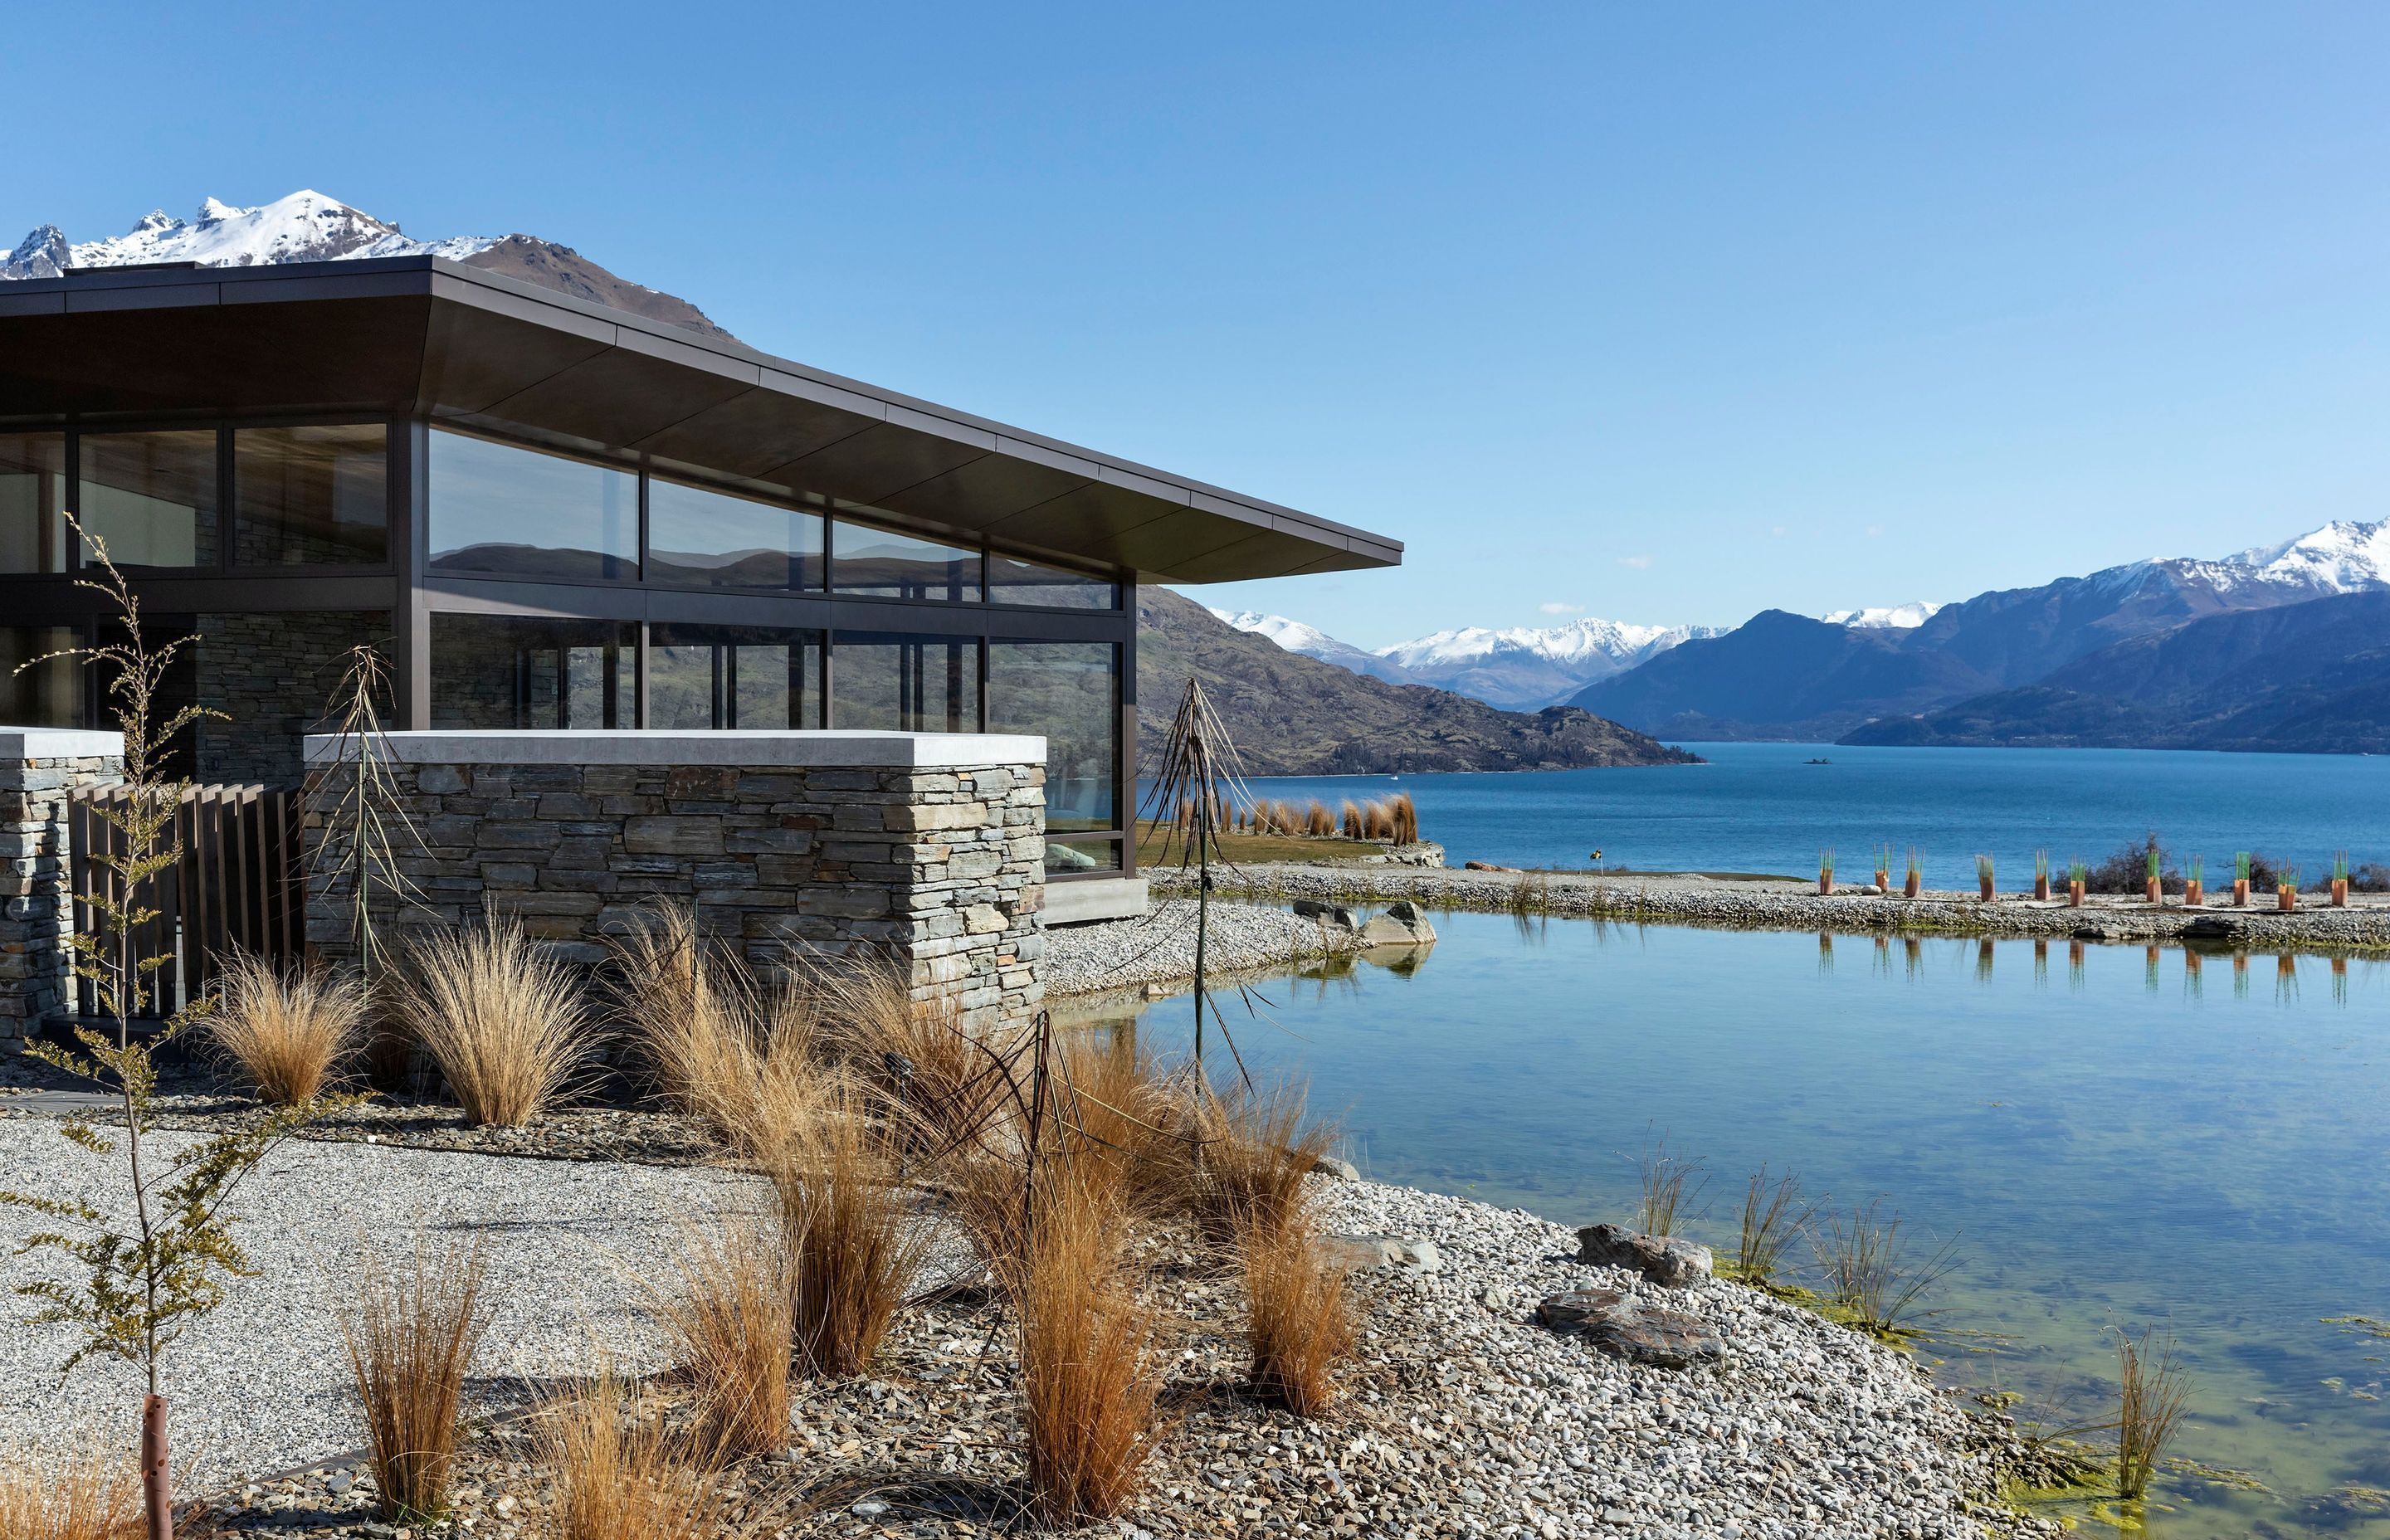 The spectacular view across the reflection pond to Lake Wakatipu and the mountains. Photograph: Simon Devitt.